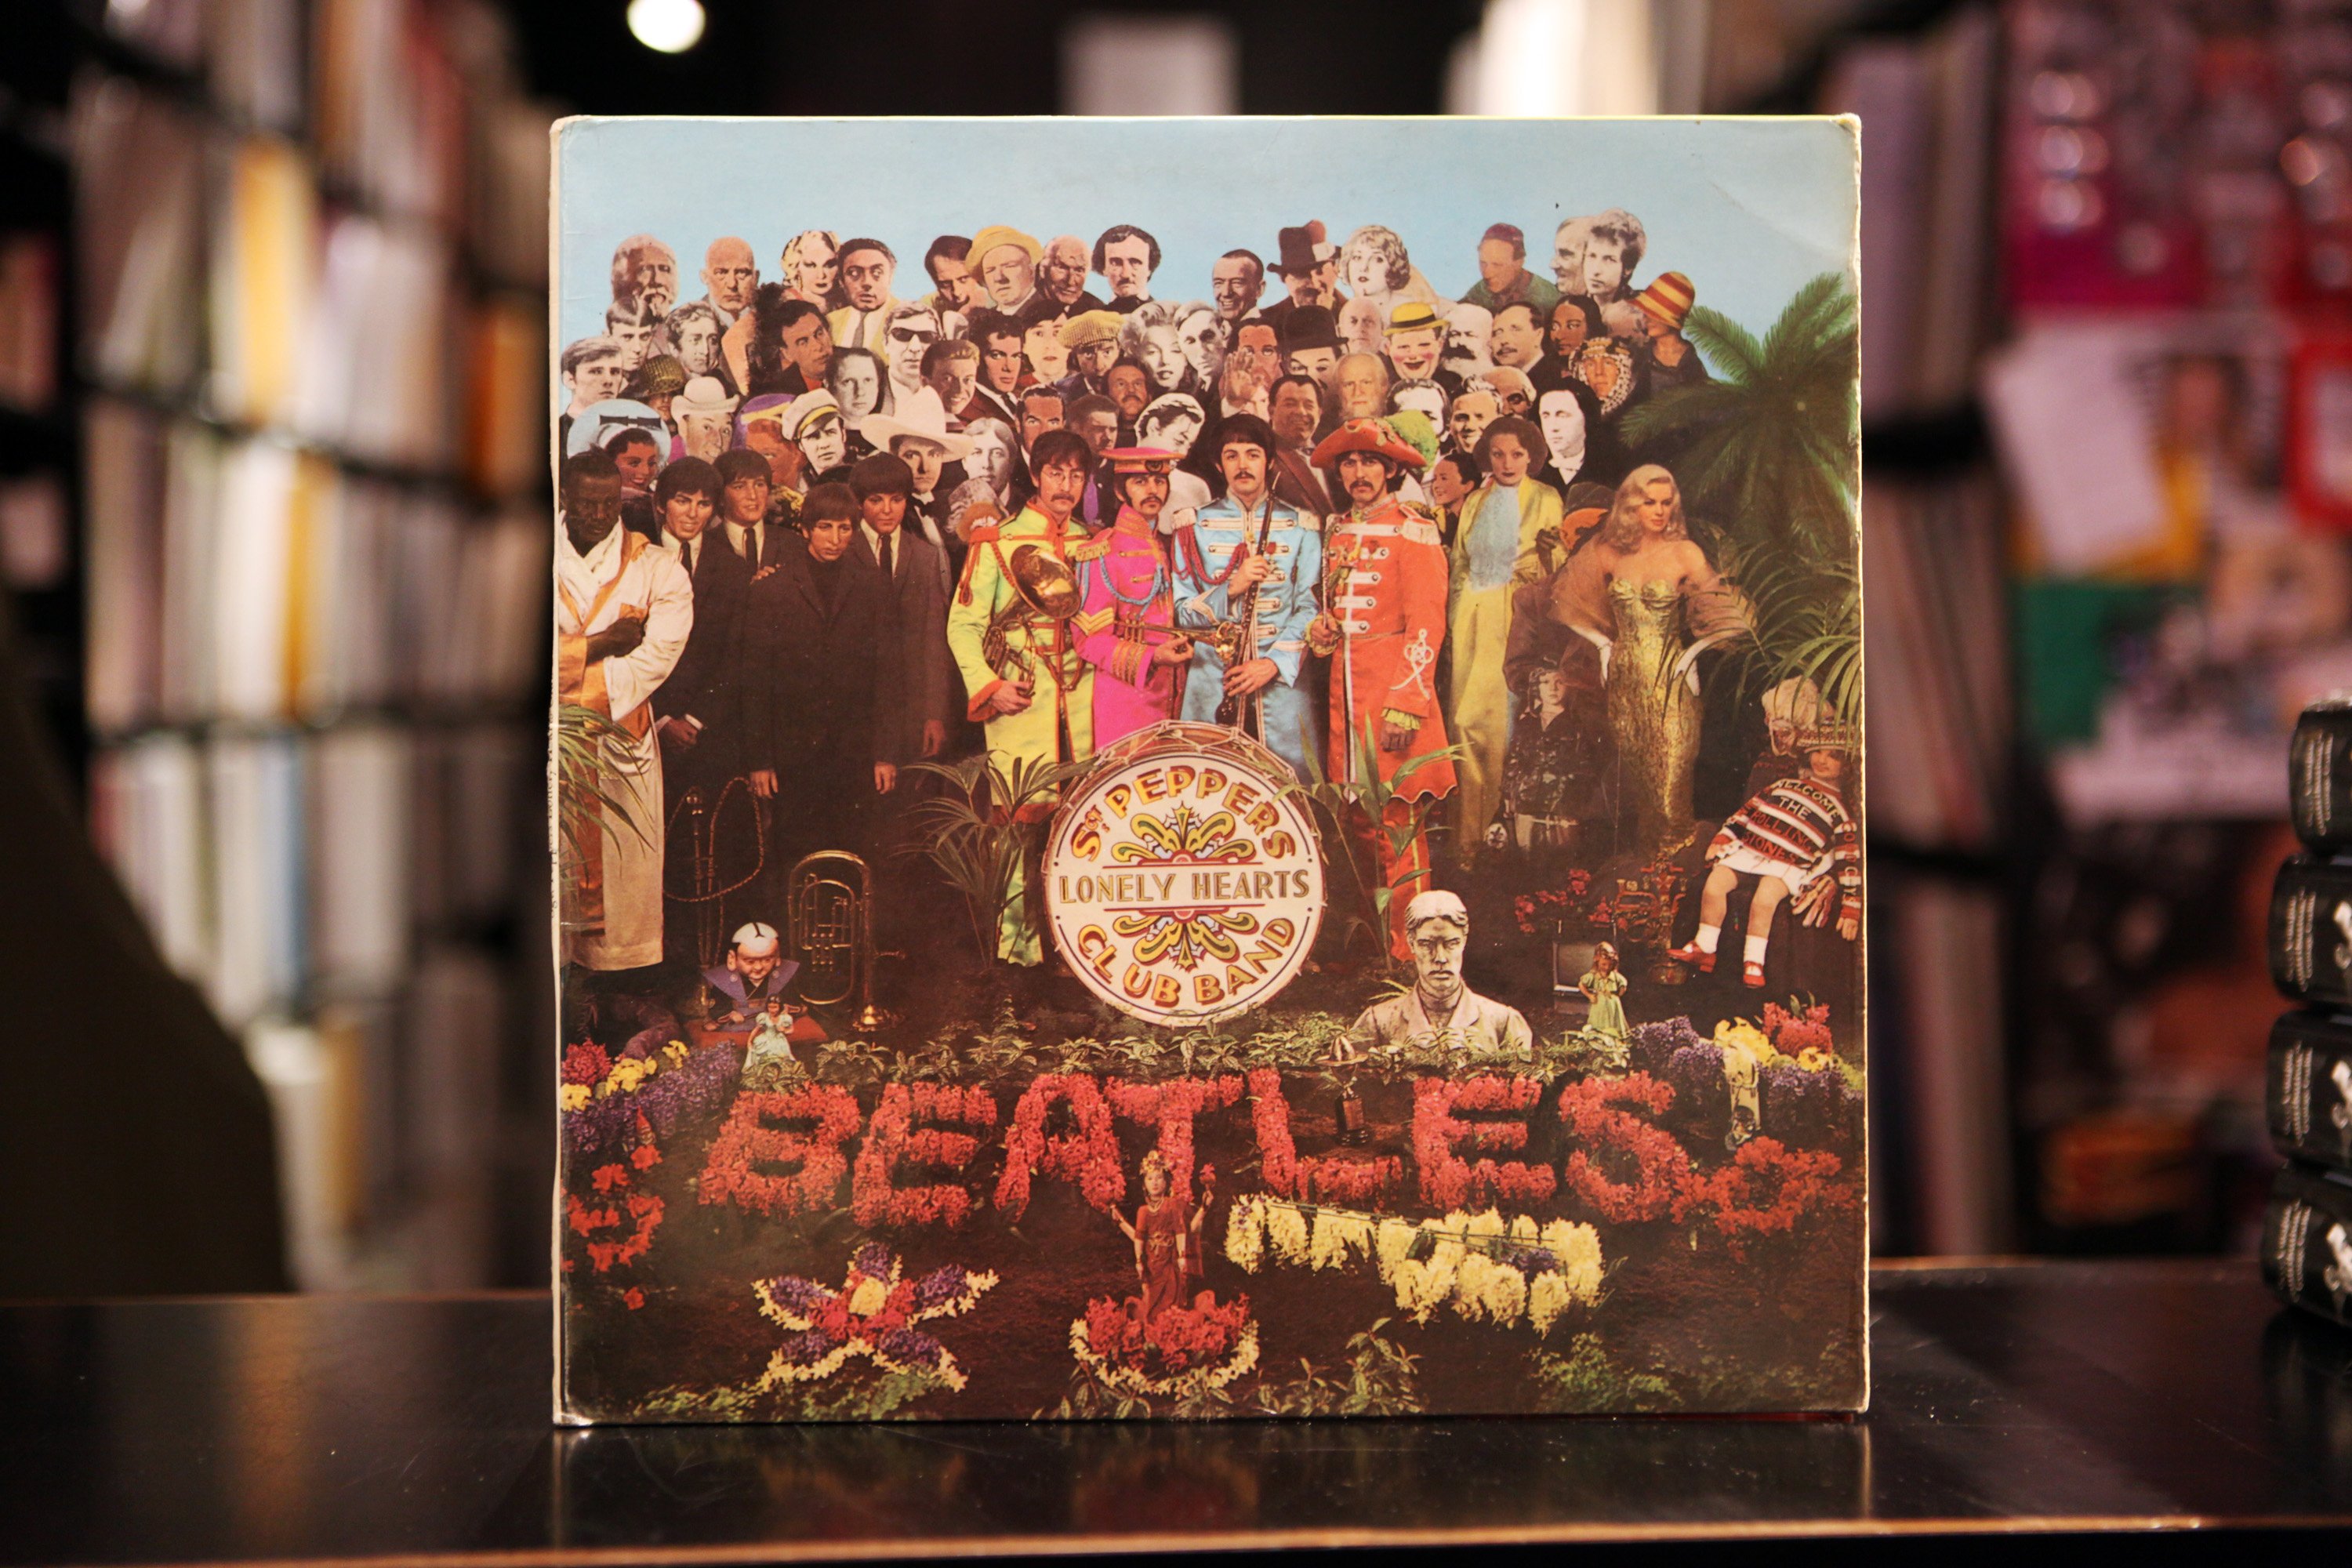 How American Bands Inspired the Name of The Beatles’ ‘Sgt. Pepper’s Lonely Hearts Club Band’